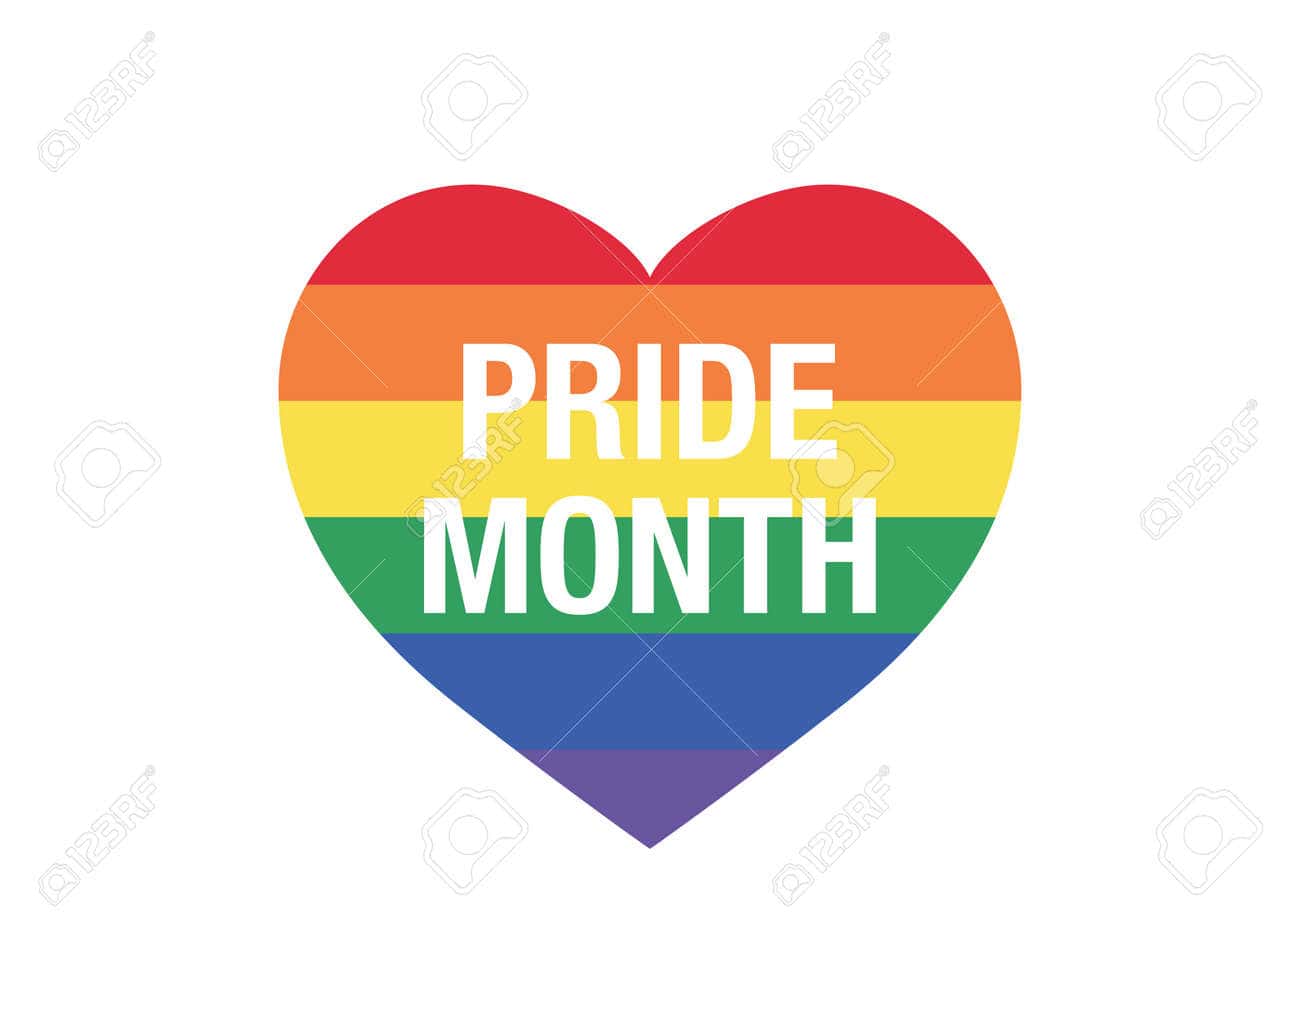 Pride Month events in June in Richmond LaptrinhX / News